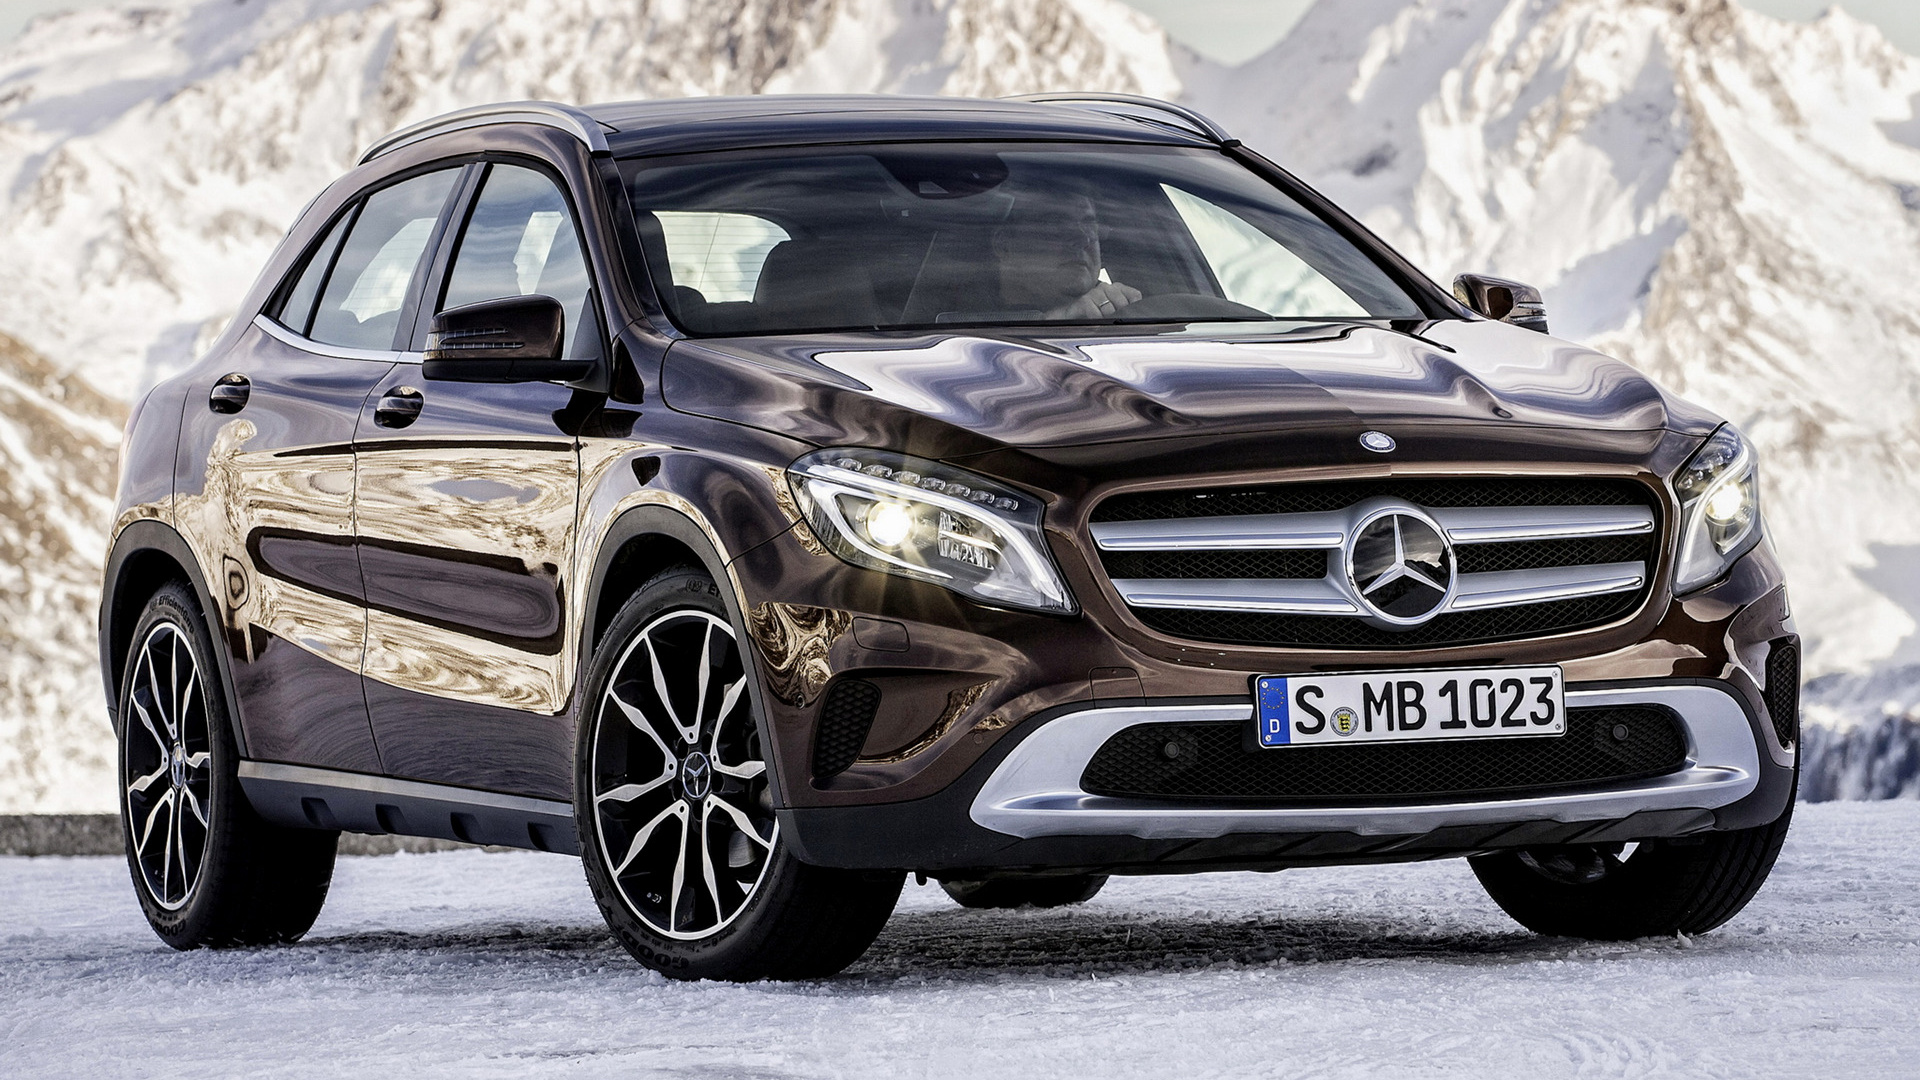 Mercedes-Benz GLA 220 CDI 4Matic Urban (2014) Wallpapers and HD Images